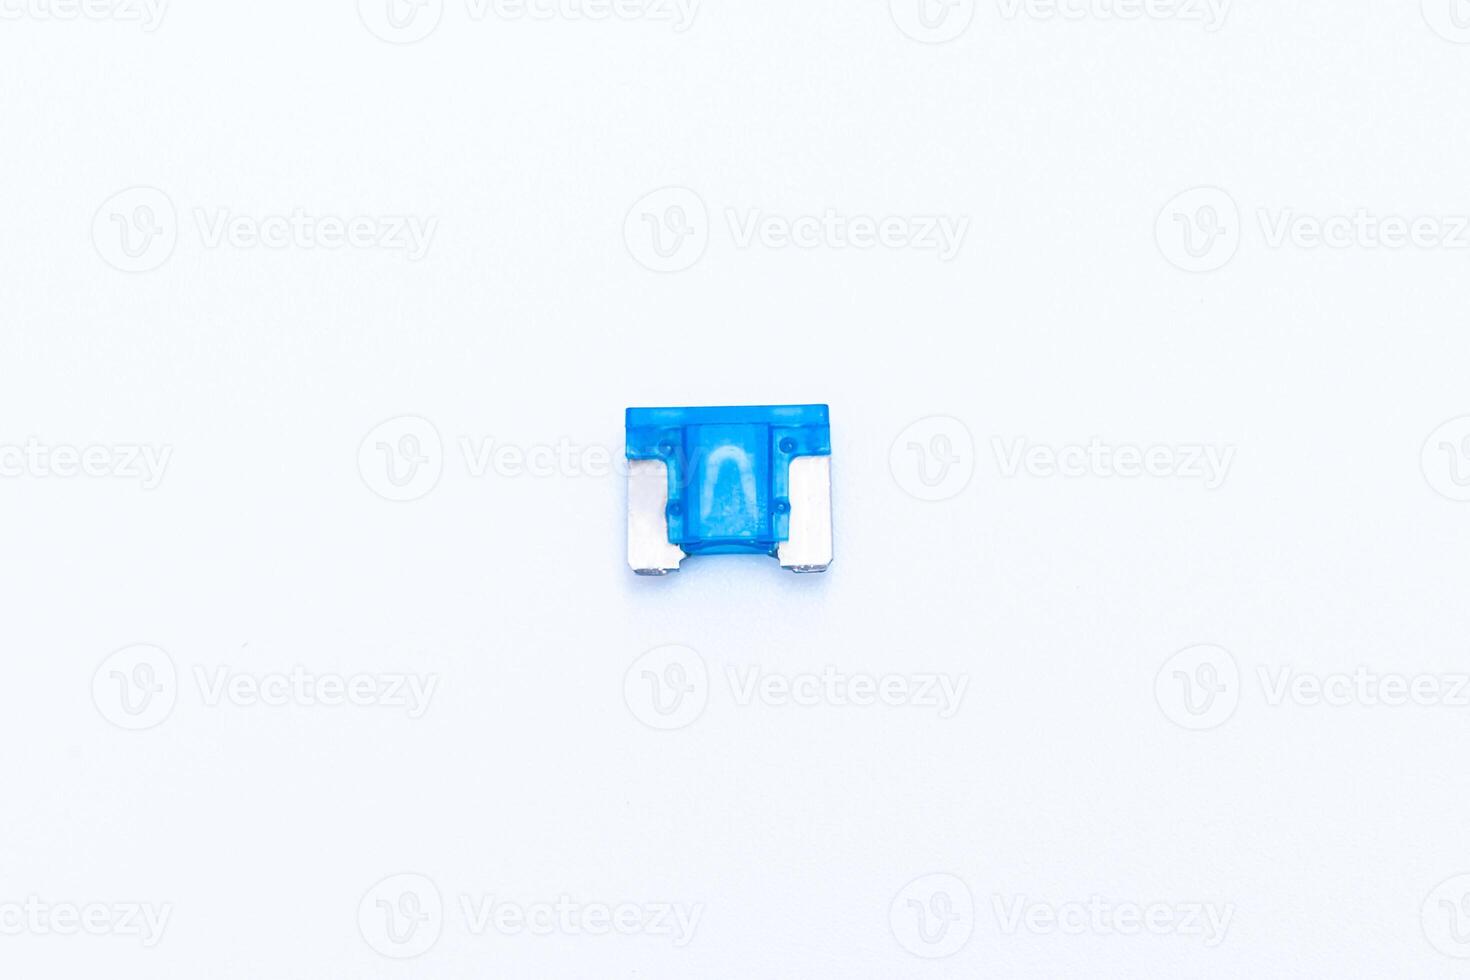 Car fuse on white background micro size use for protection in electric system of car photo